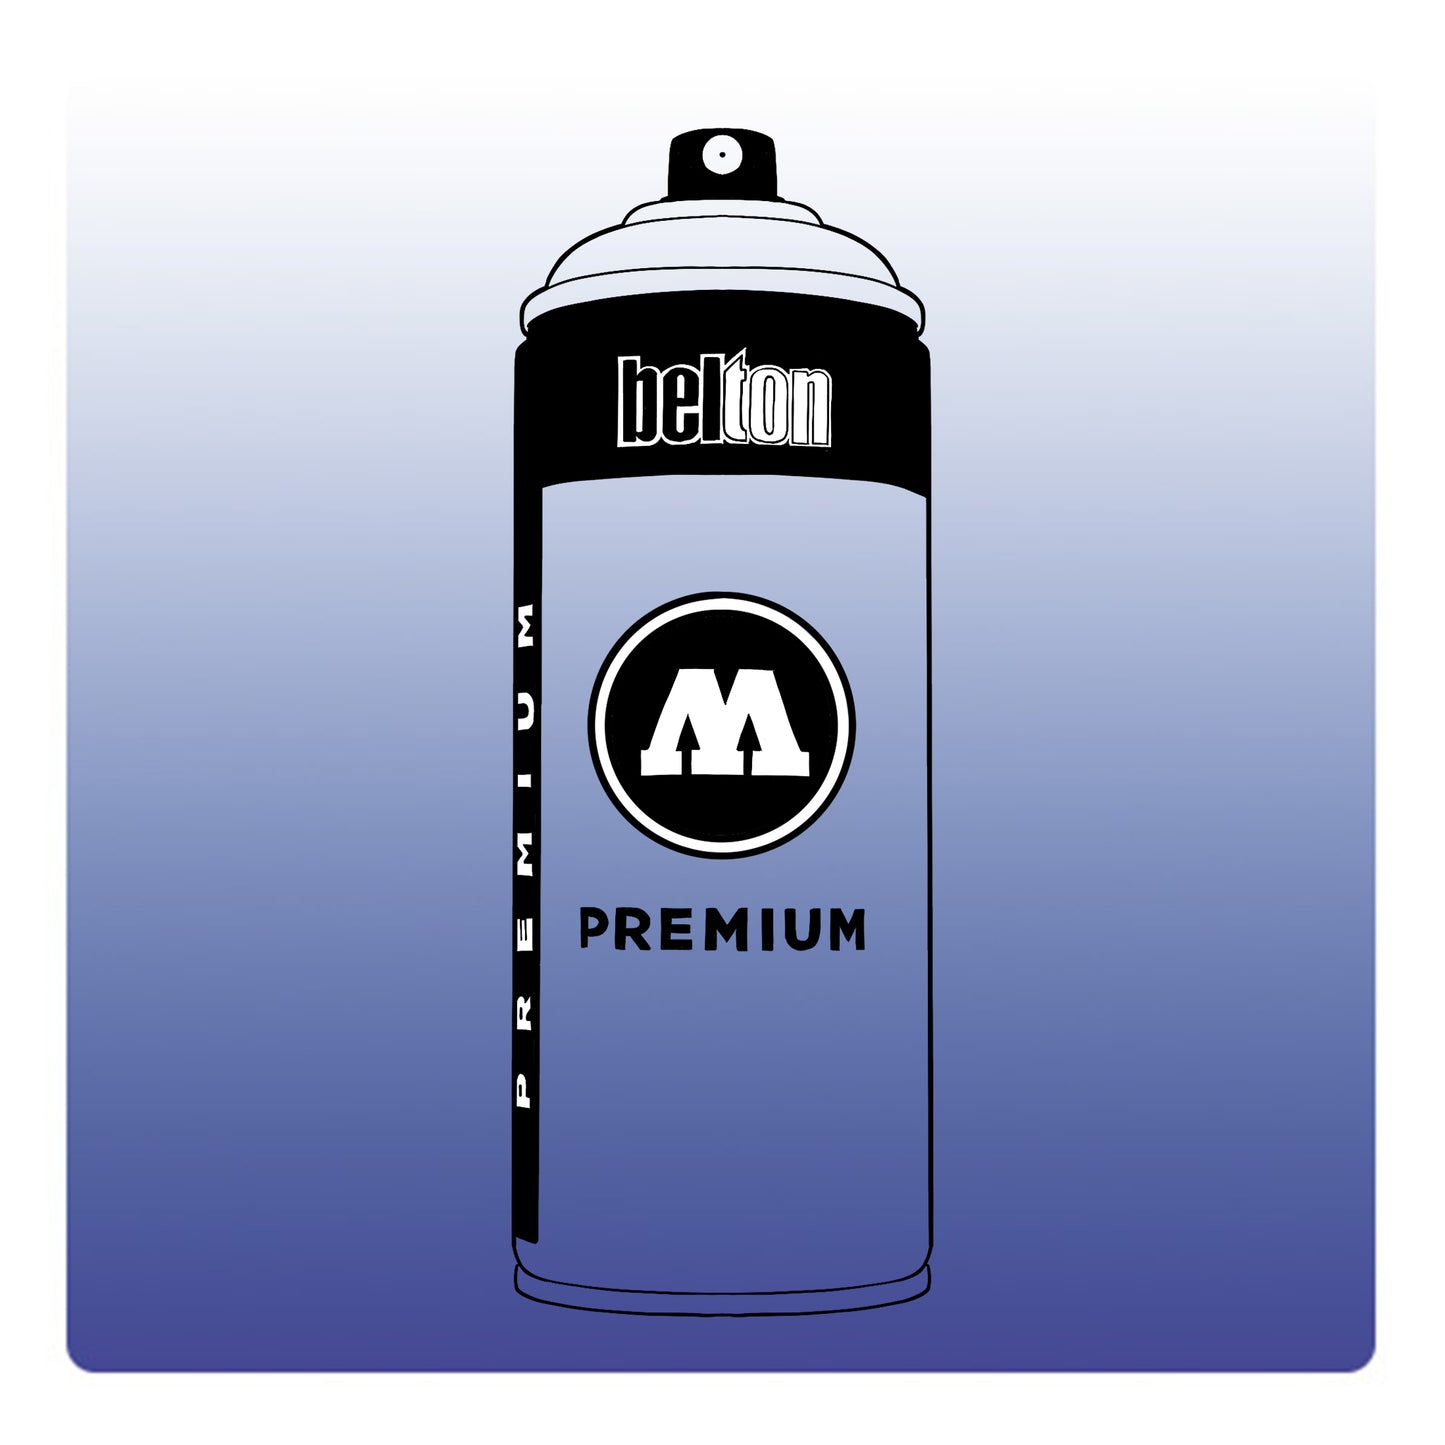 A line drawing of a spray paint can with a transparent, dark blue color swatch.